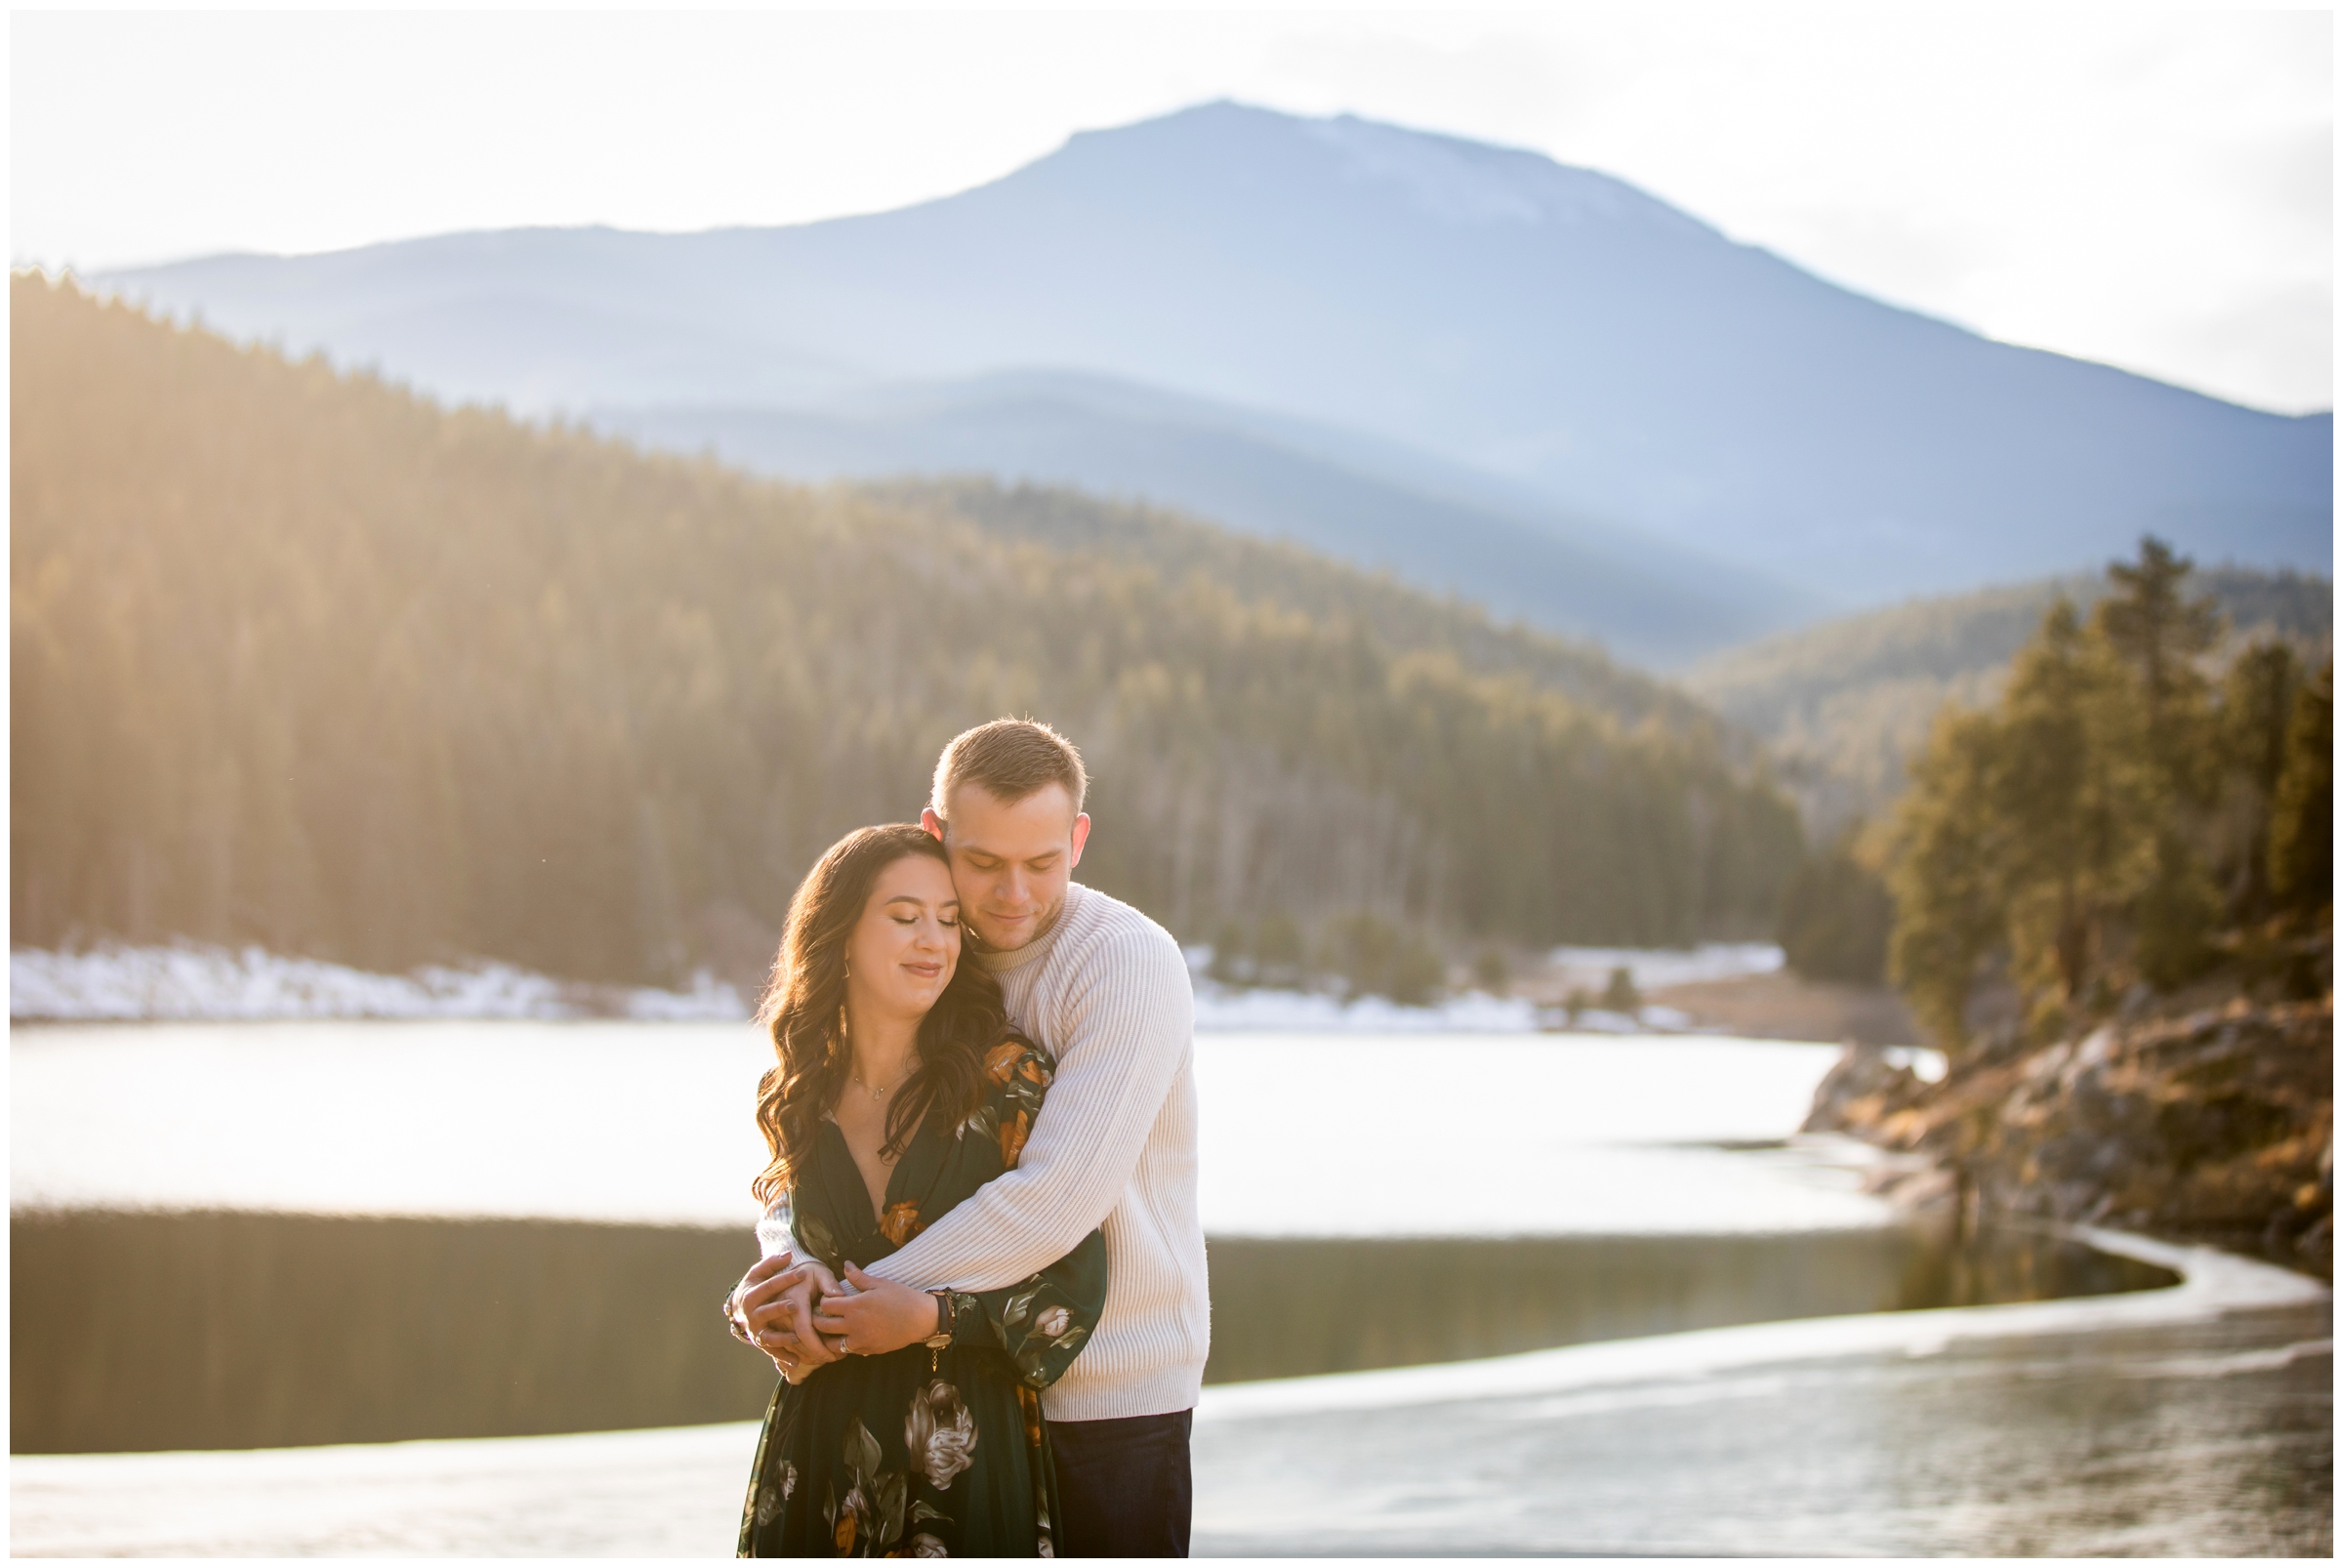 Fall couples photos in Colorado mountains by Evergreen portrait photographer Plum Pretty Photography